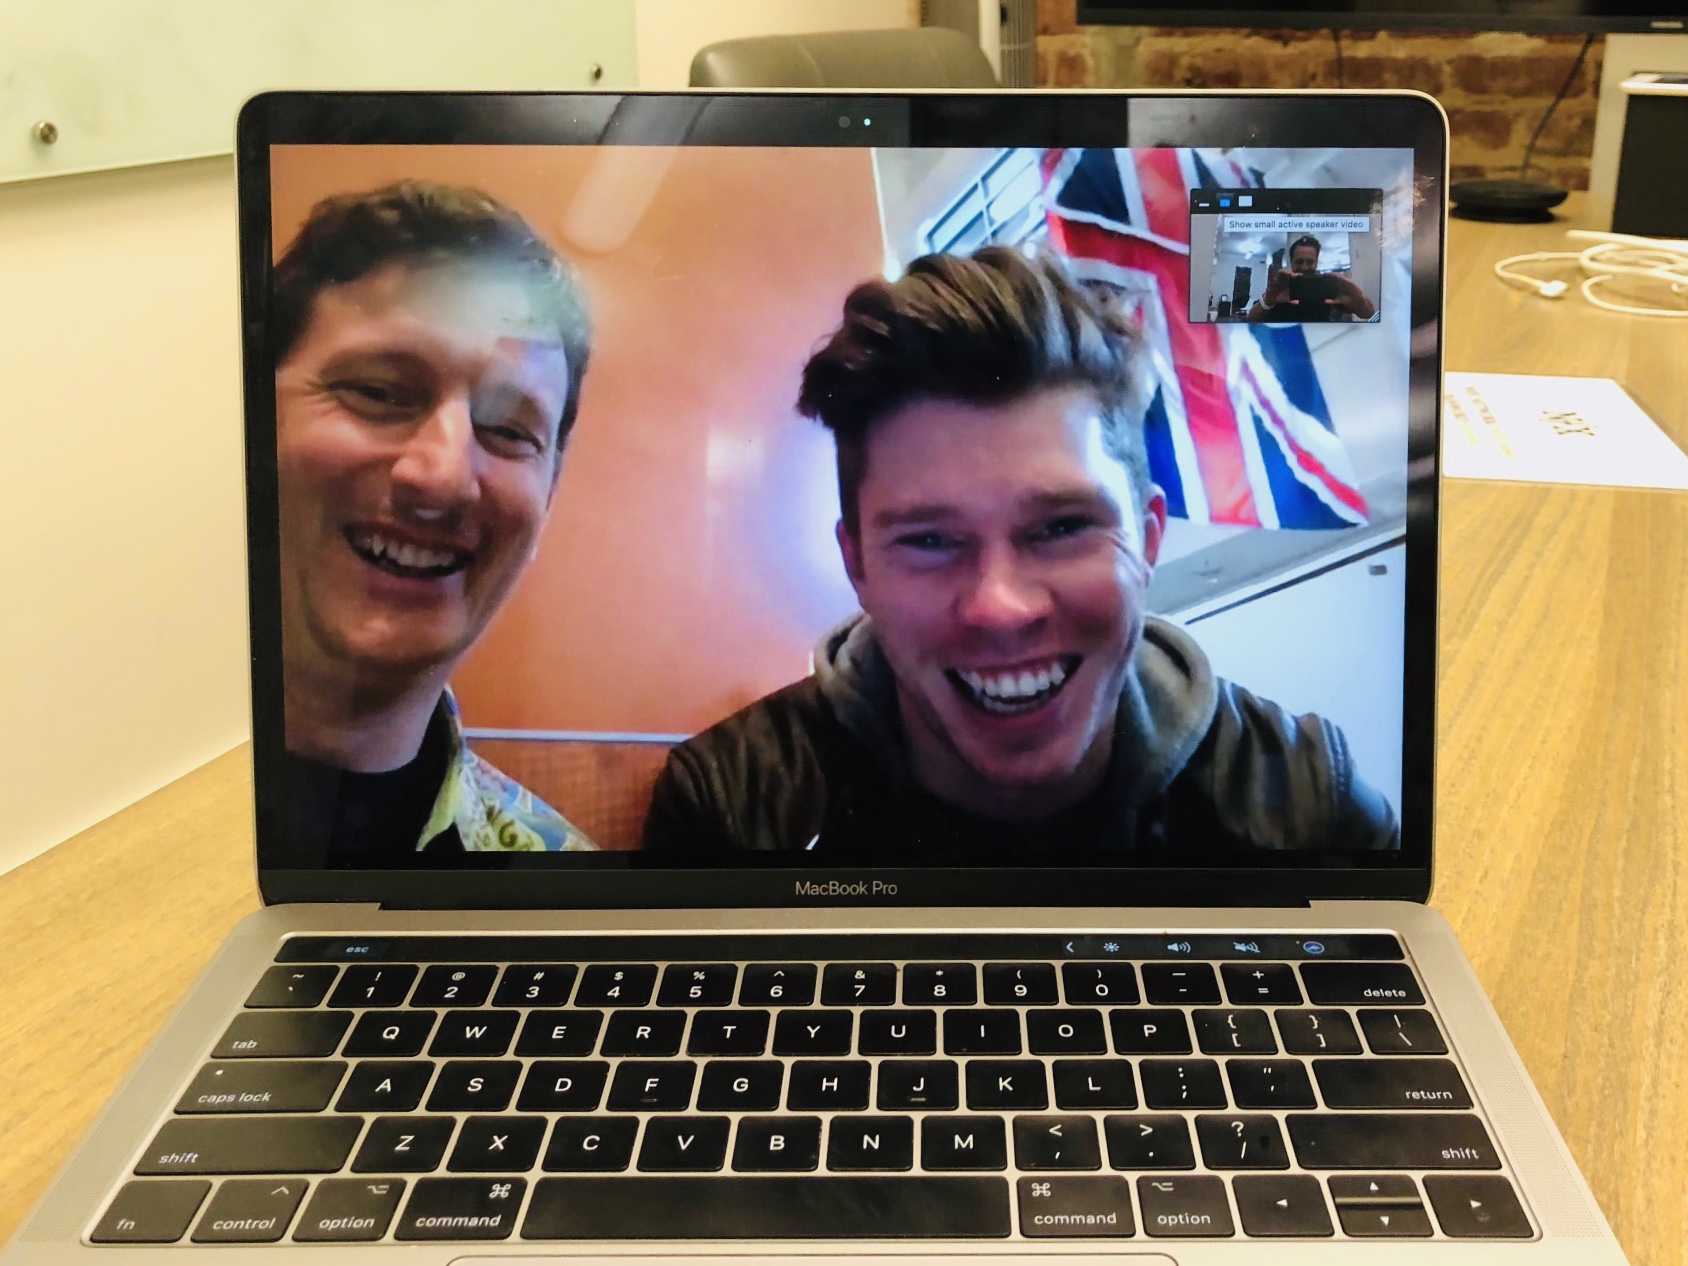 Co-Founder Sam Browne joins NFX partners James Currier and Pete Flint via video